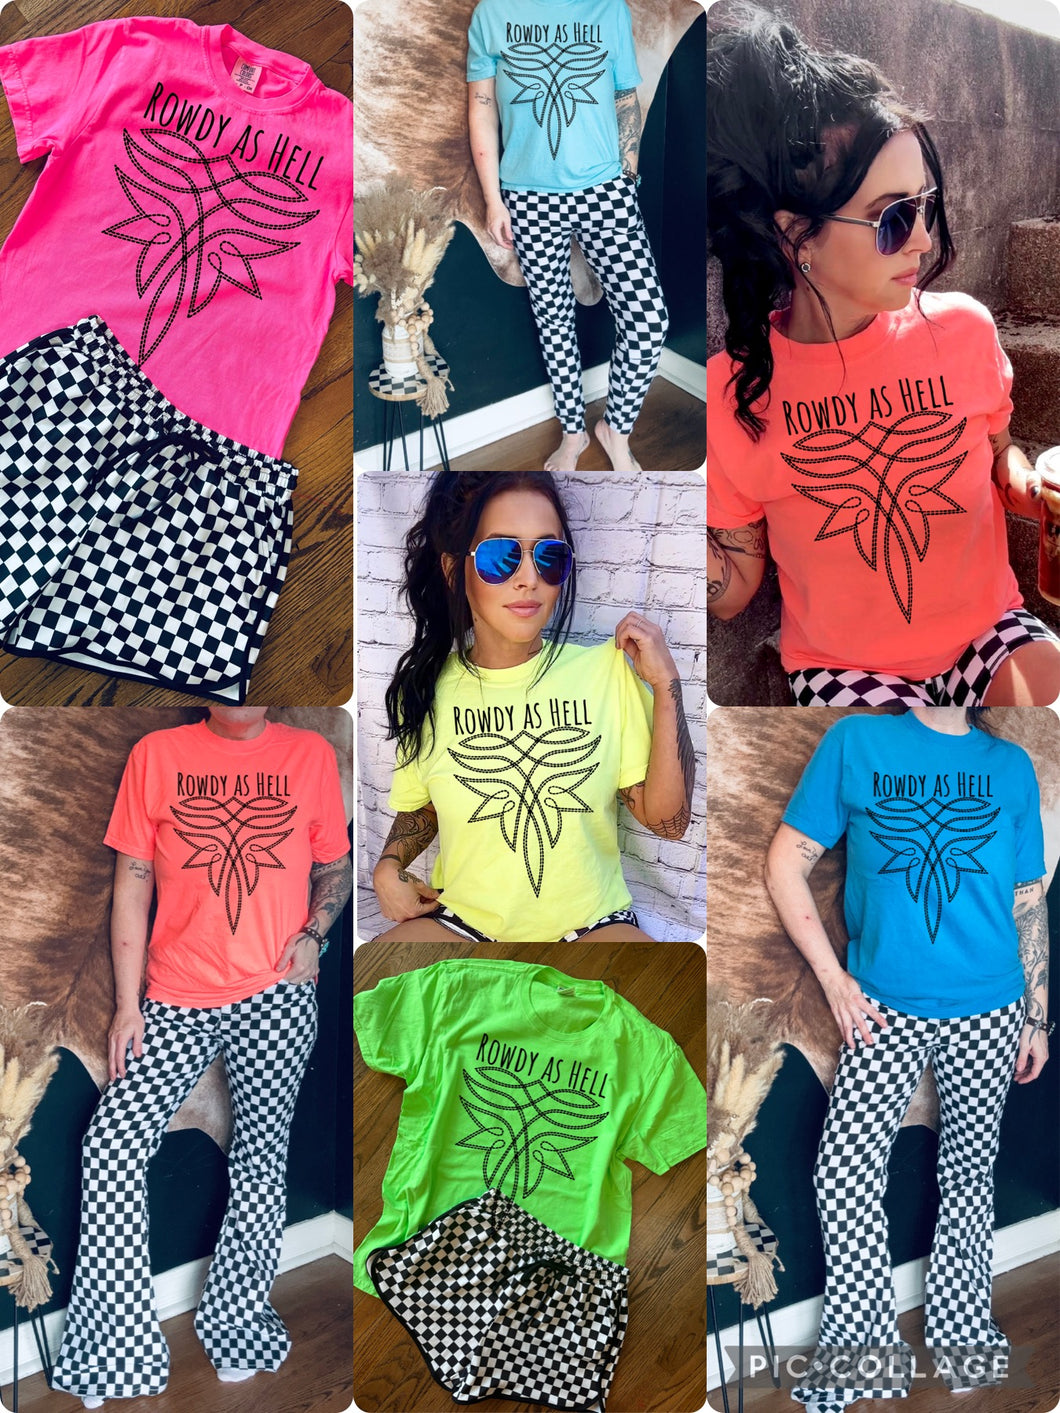 Rowdy as hell bootstitch boot stitch Neon Comfort Colors Collection // checkered shorts sold separately - Mavictoria Designs Hot Press Express